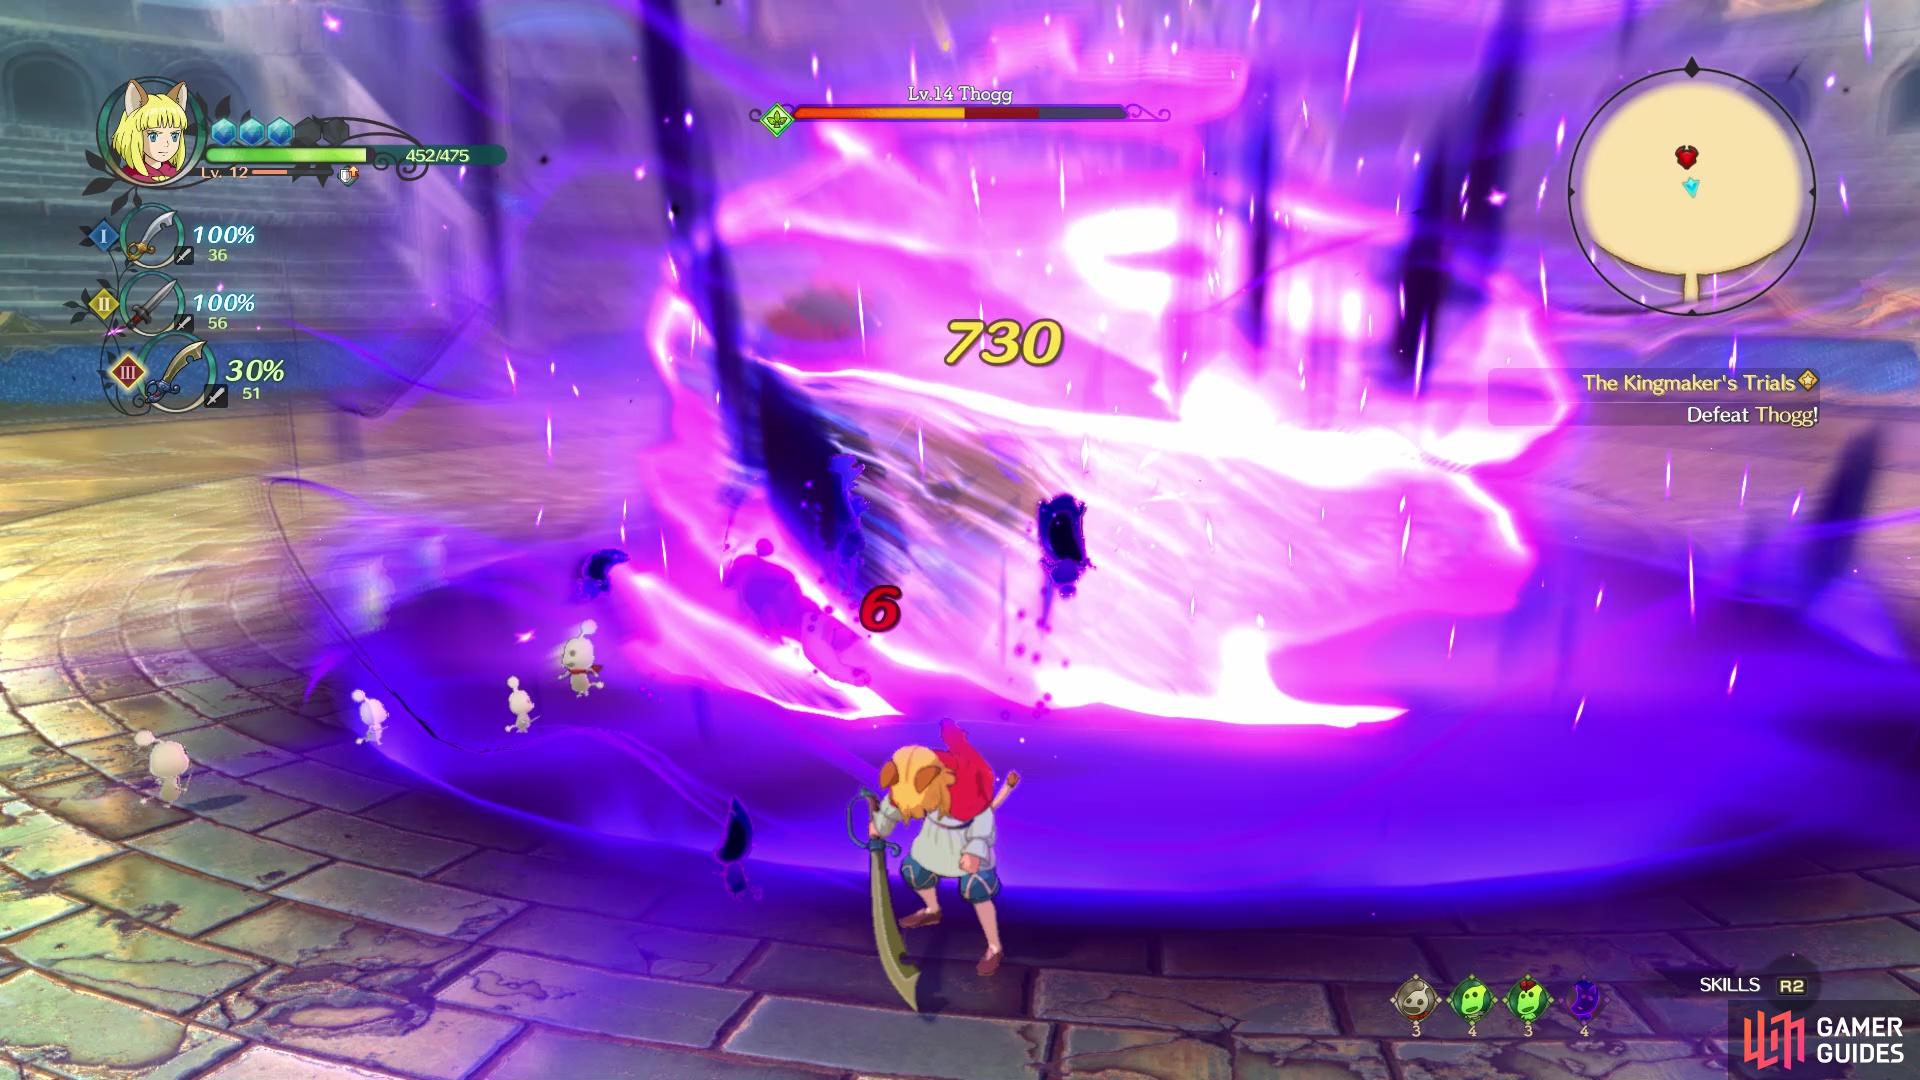 Tove can knock off a huge chunk of the boss' HP with its special move